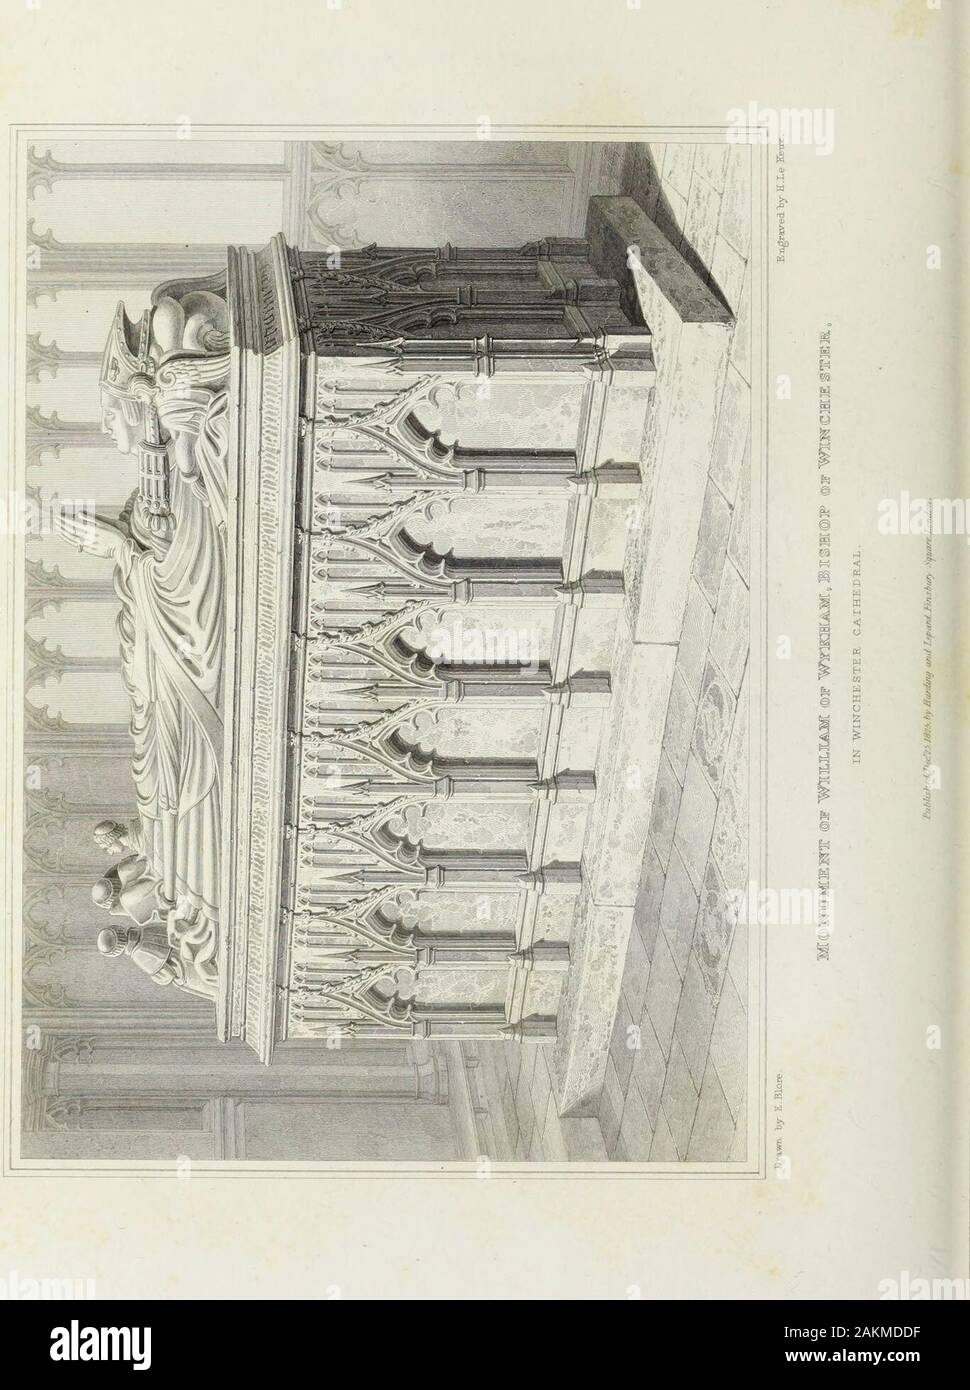 The monumental remains of noble and eminent persons : comprising the sepulchral antiquities of Great Britain . putting them in execution, that he might have the satis-faction of seeing the beneficial effects of them; and that, byconstant observation, and due experience, he might, from timeto time, improve and perfect them, so as to render them yetmore beneficial. The monument of the illustrious prelate, of whom we havenow been treating, stands on the South side of the nave ofWinchester Cathedral, under an arch dividing it from the sideaisle, and within a chapel of open work, which altogether f Stock Photo